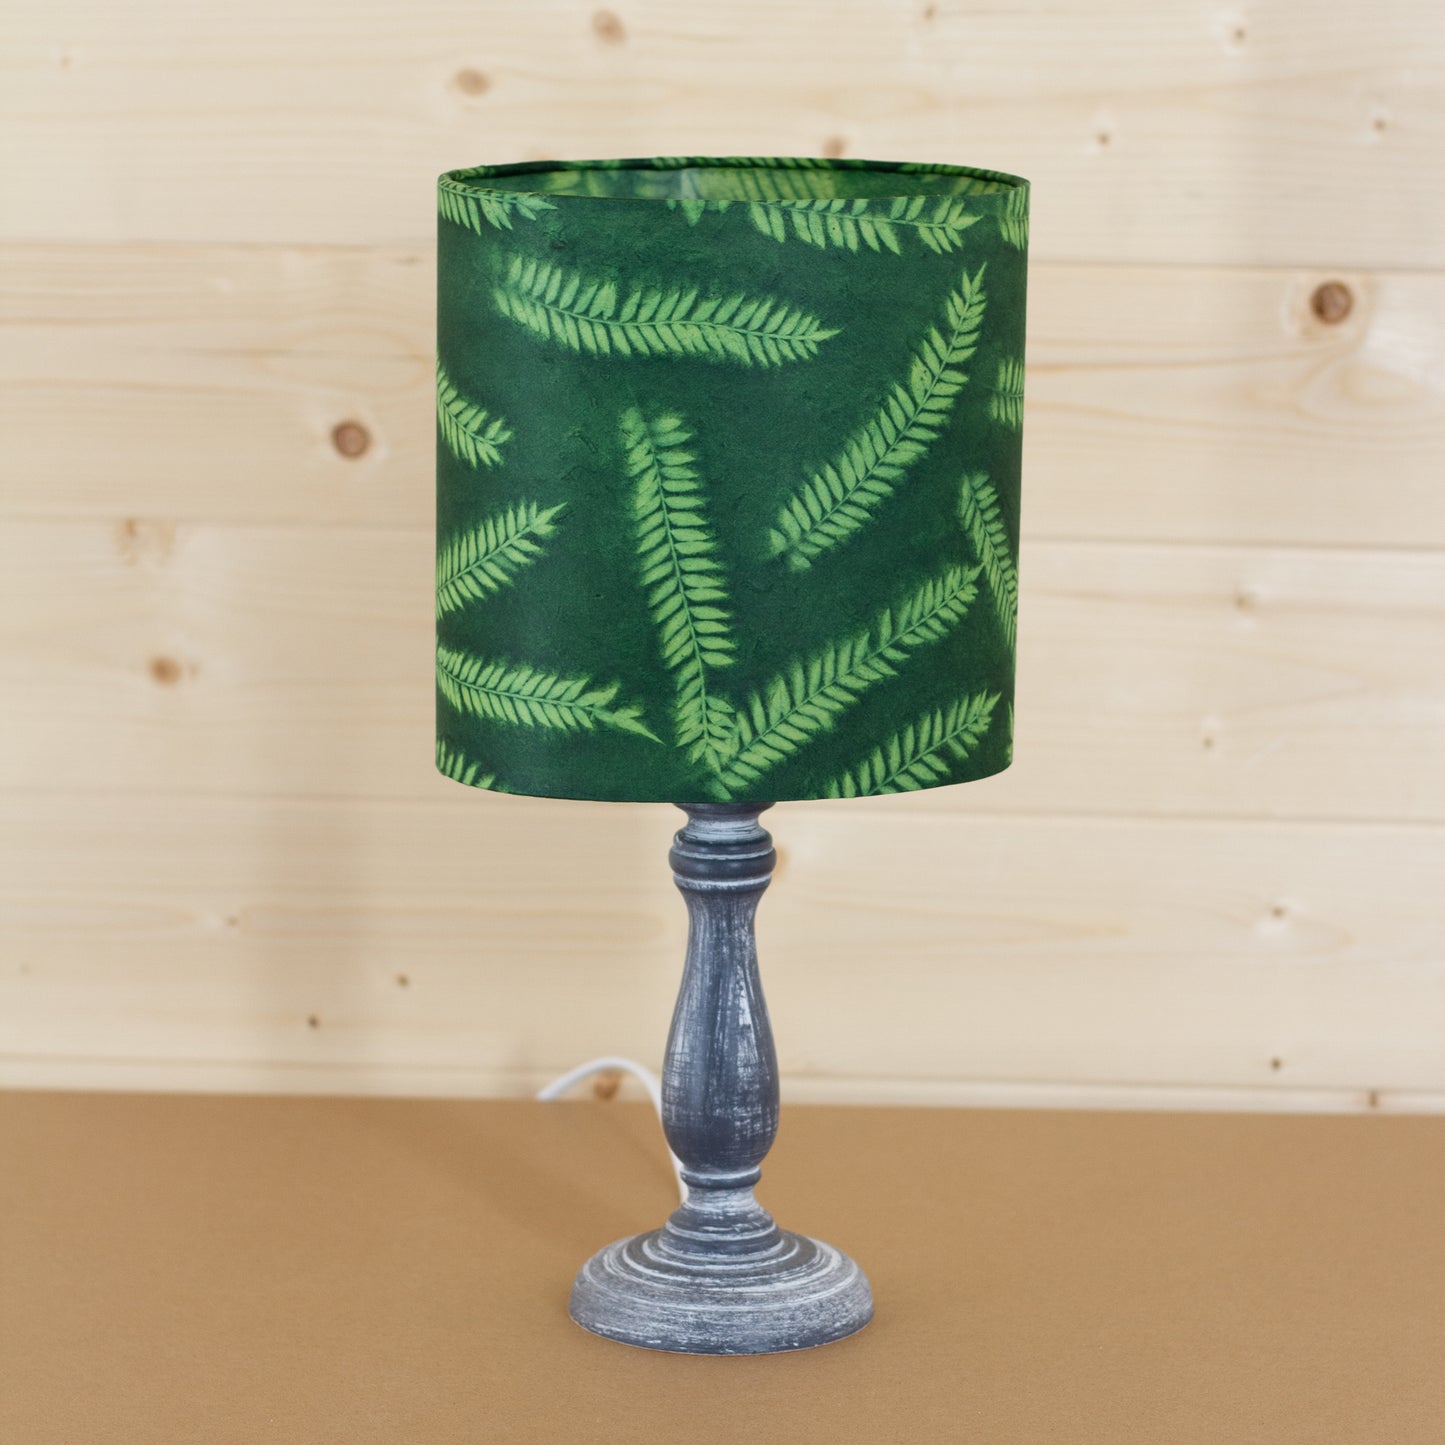 Paros Wooden Table Lamp with a Oval Shade in P27 ~ Resistance Dyed Green Fern